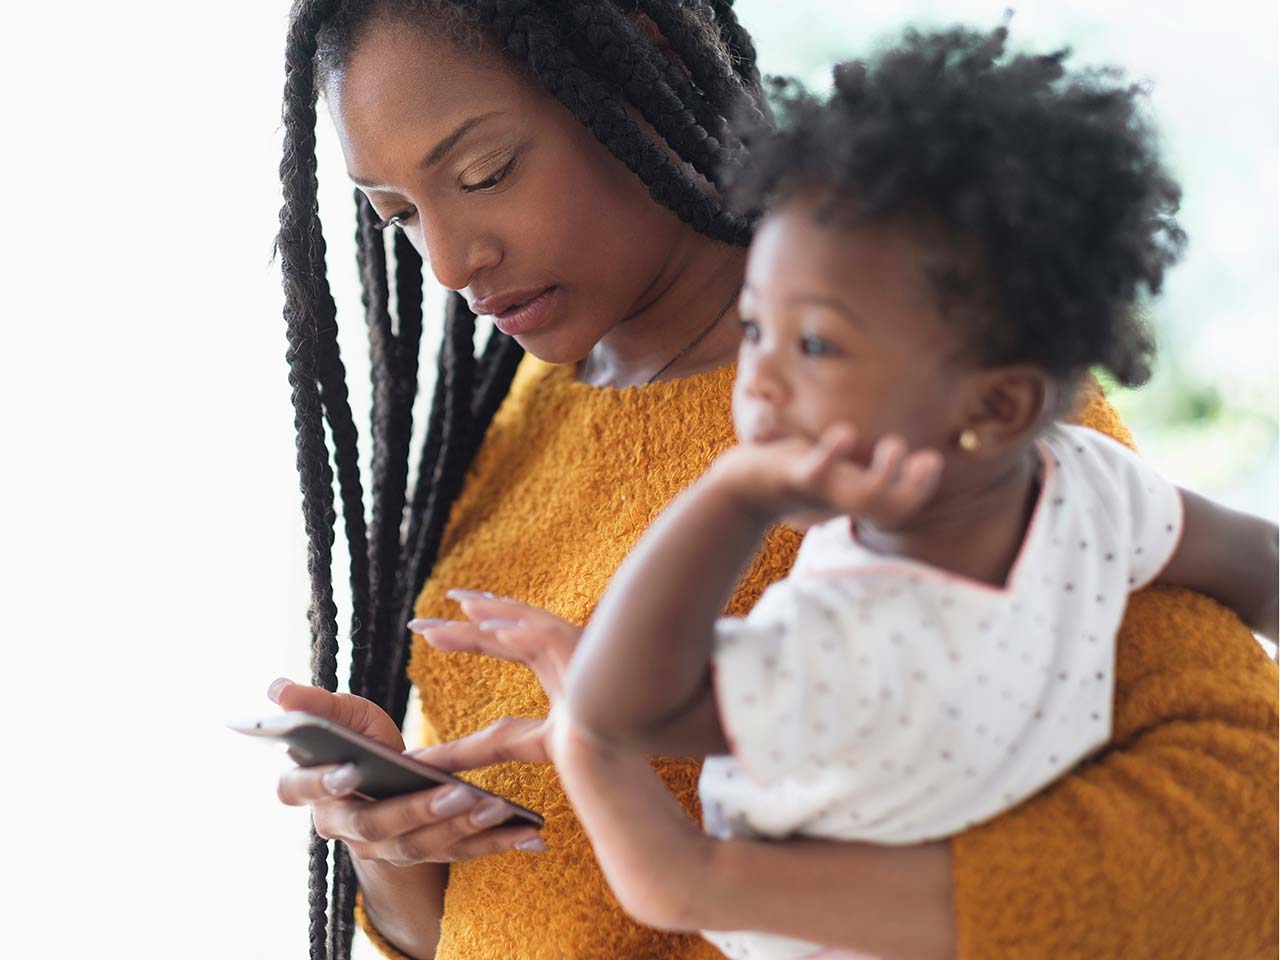 woman holding a baby reading a text message